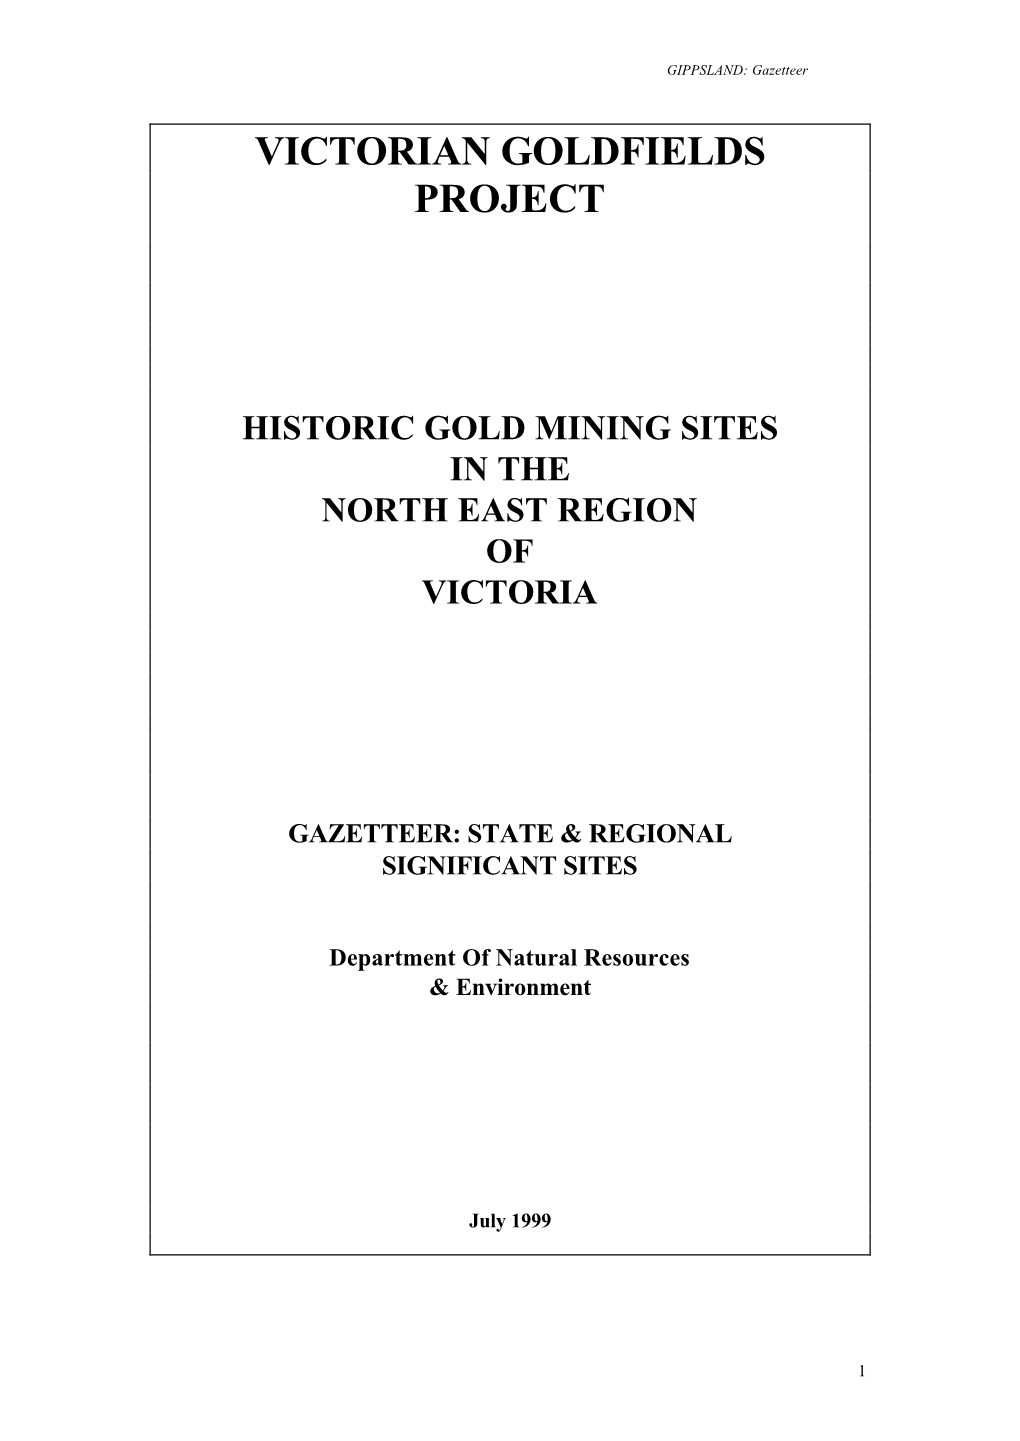 Historic-Gold-Mining-Sites-In-The-North